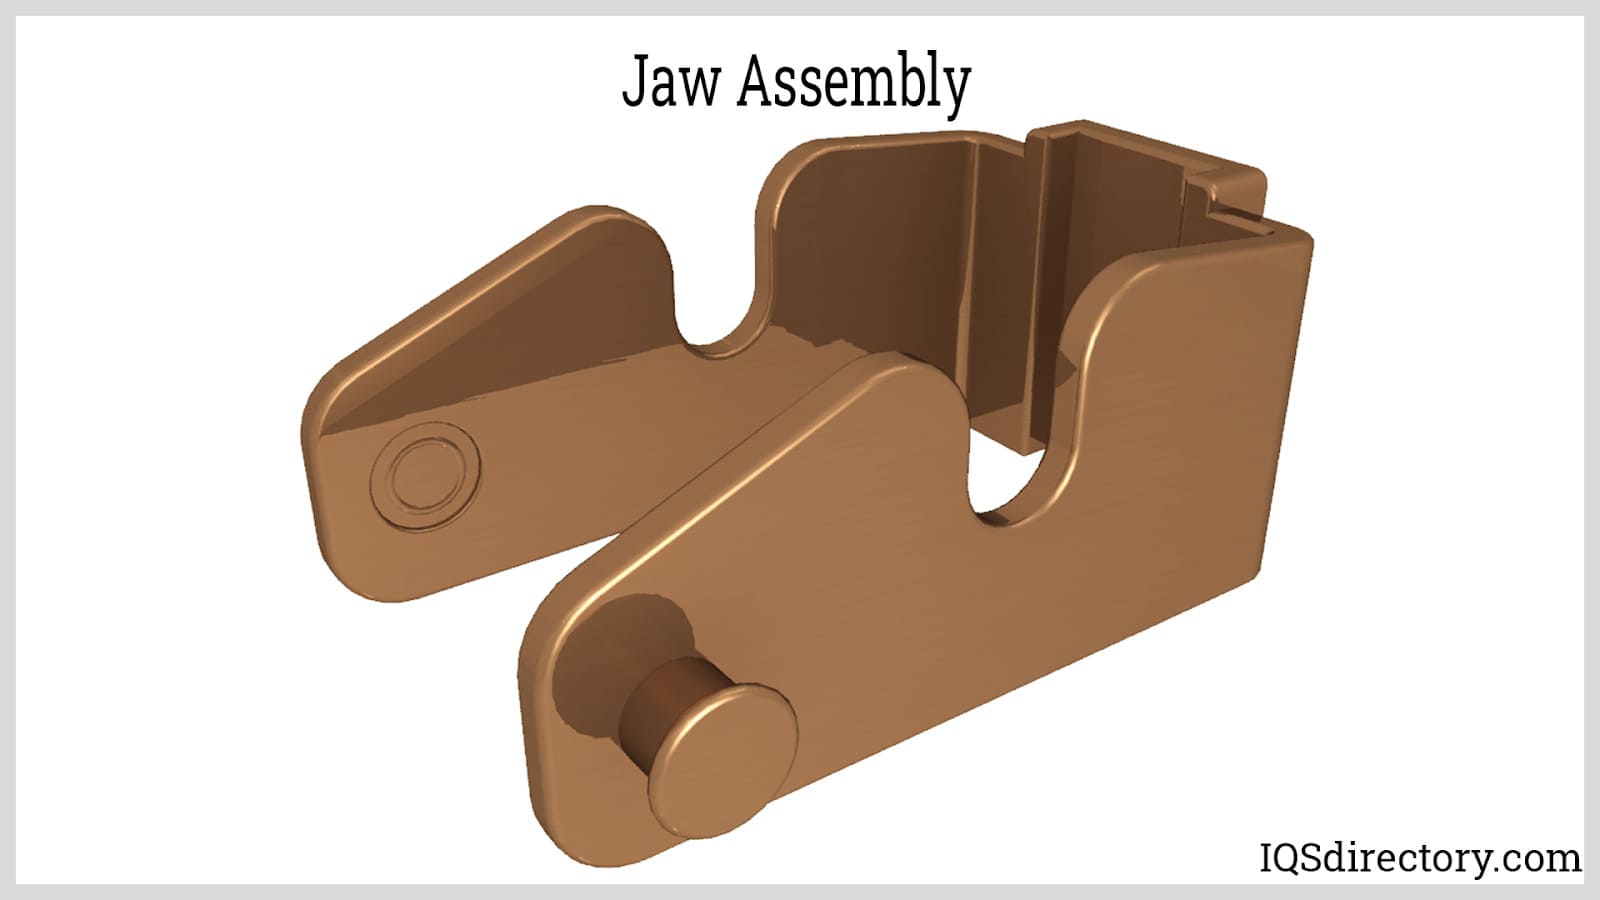 Jaw Assembly for Tooling